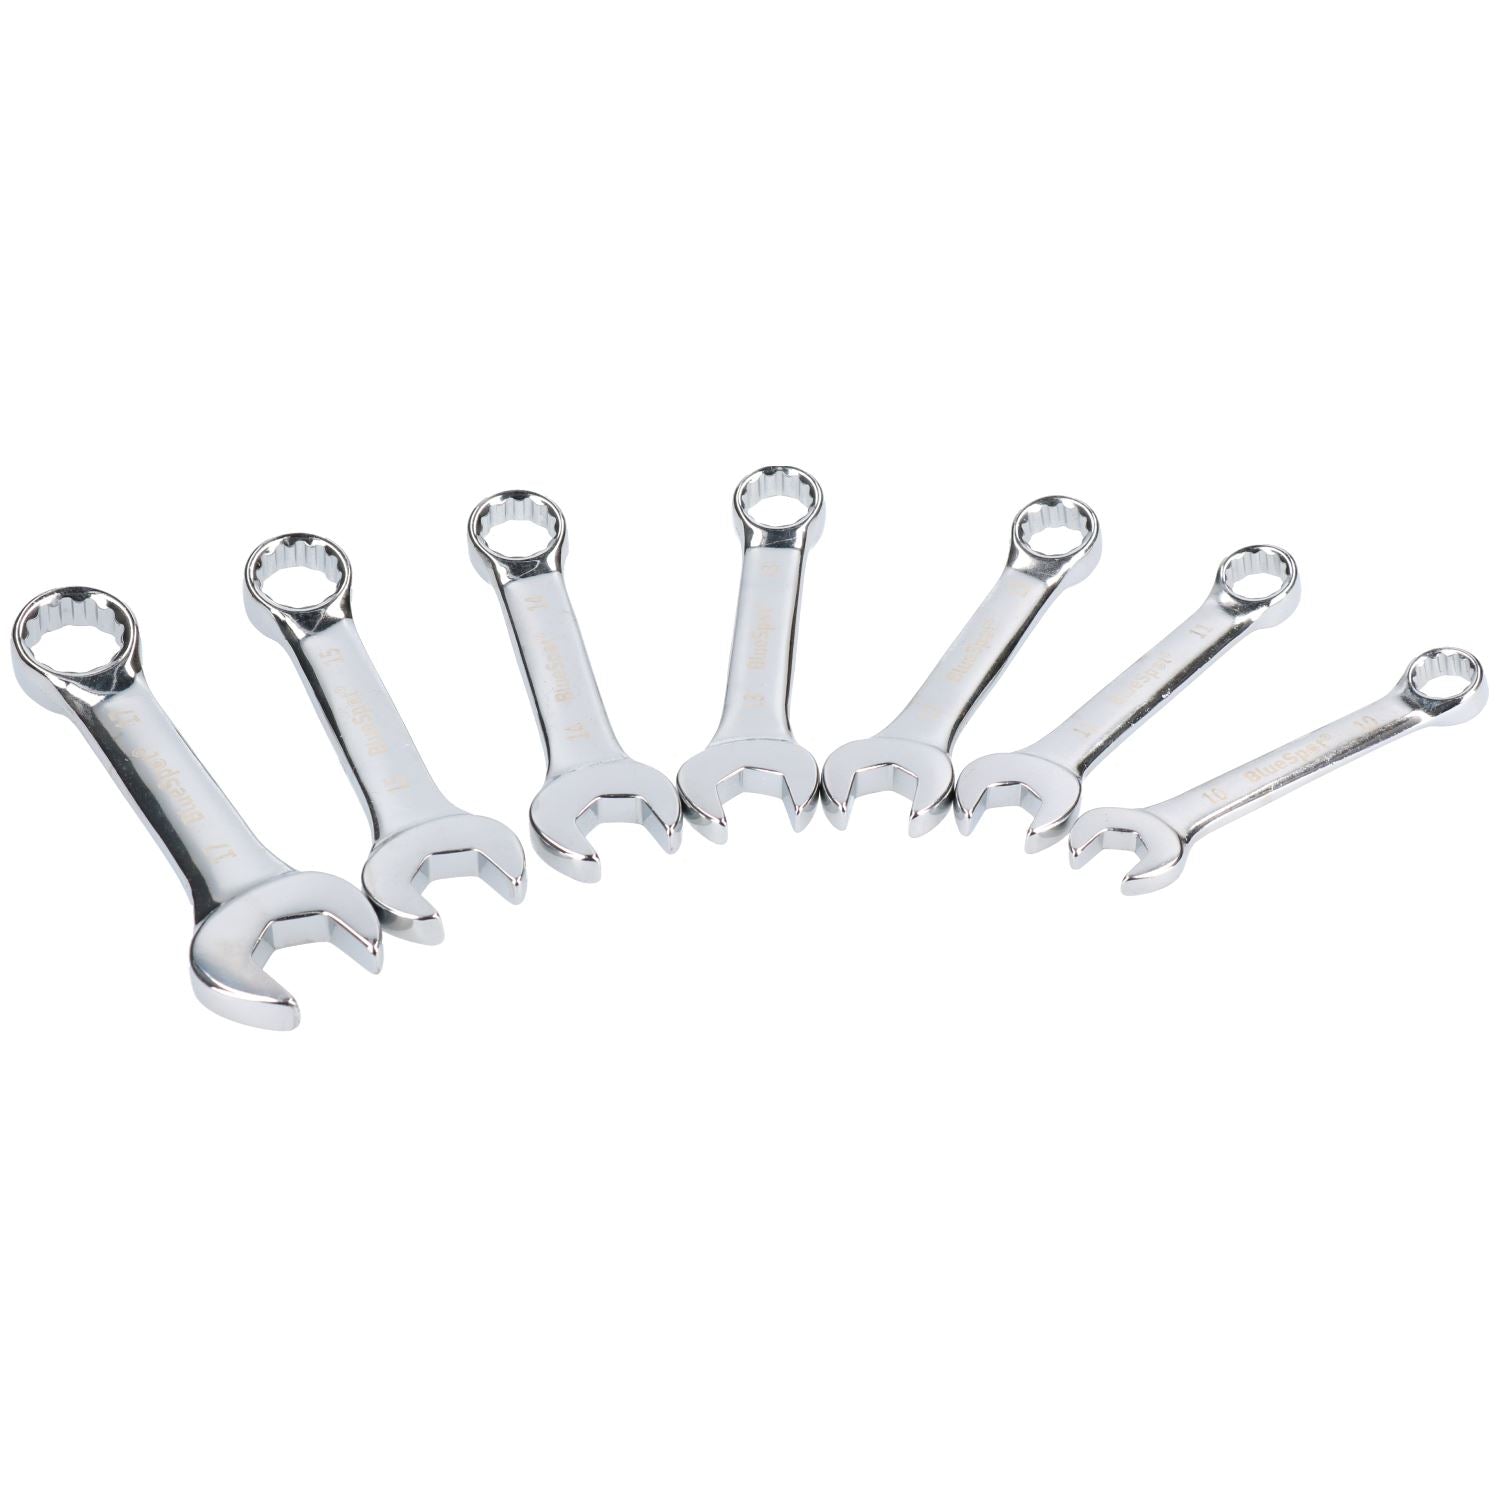 Stubby Metric Combination Spanner Wrench Set 10mm - 17mm 7pc Set